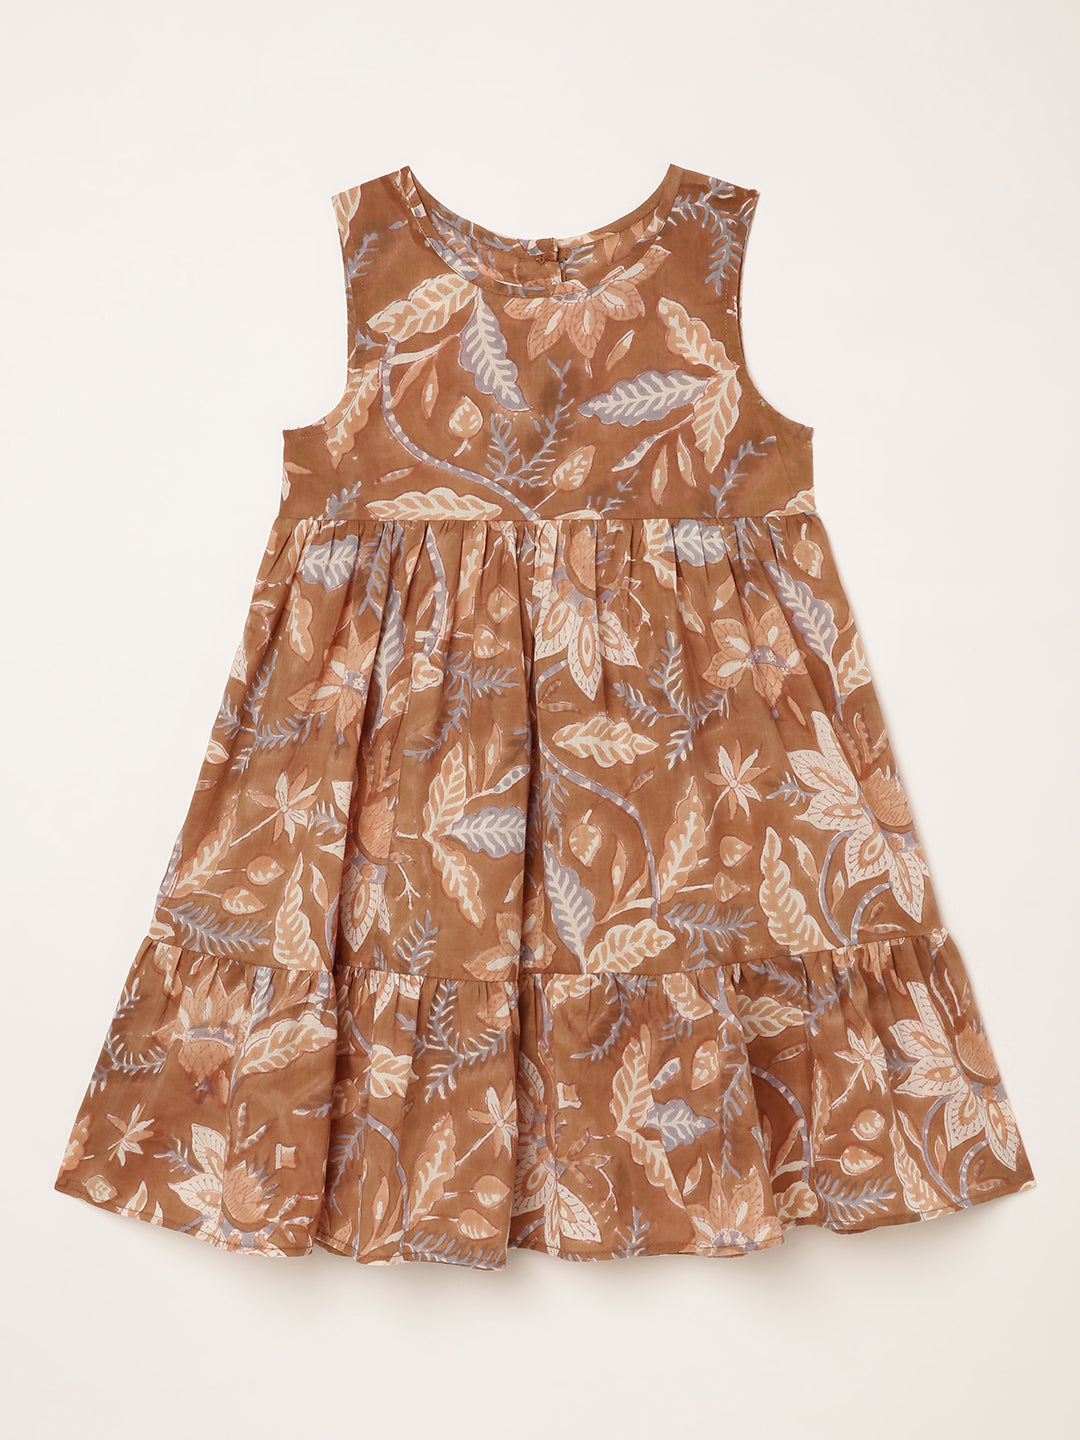 Sleeveless dress for girls with brown and lavender block print. Ages 1-8 years - Front